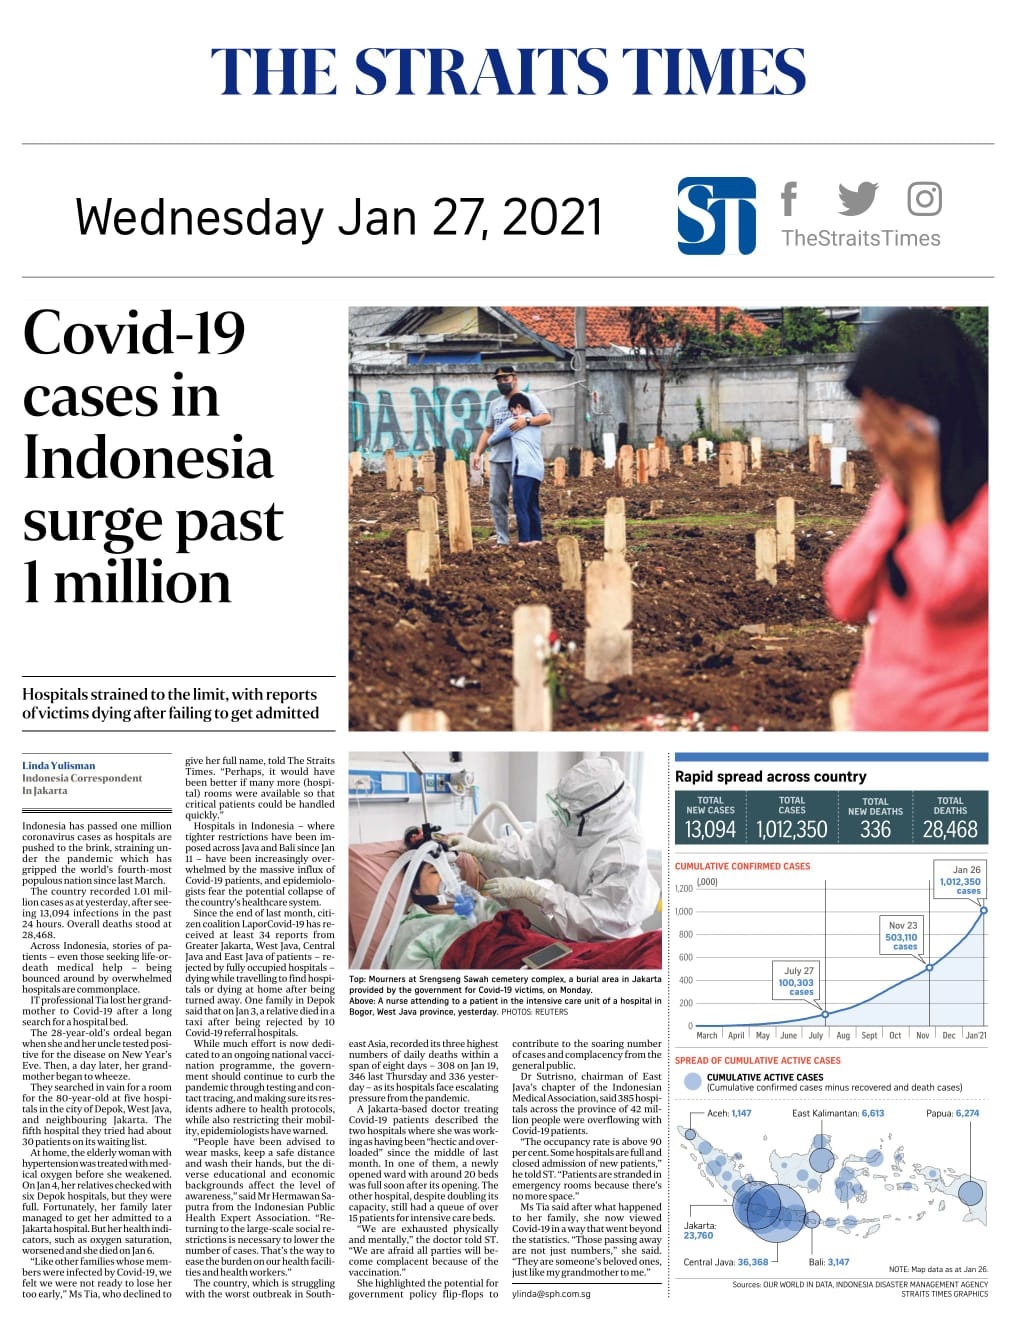 Covid-19 cases in Indonesia surge past 1 million - Published in The Straits Times January 27, 2021